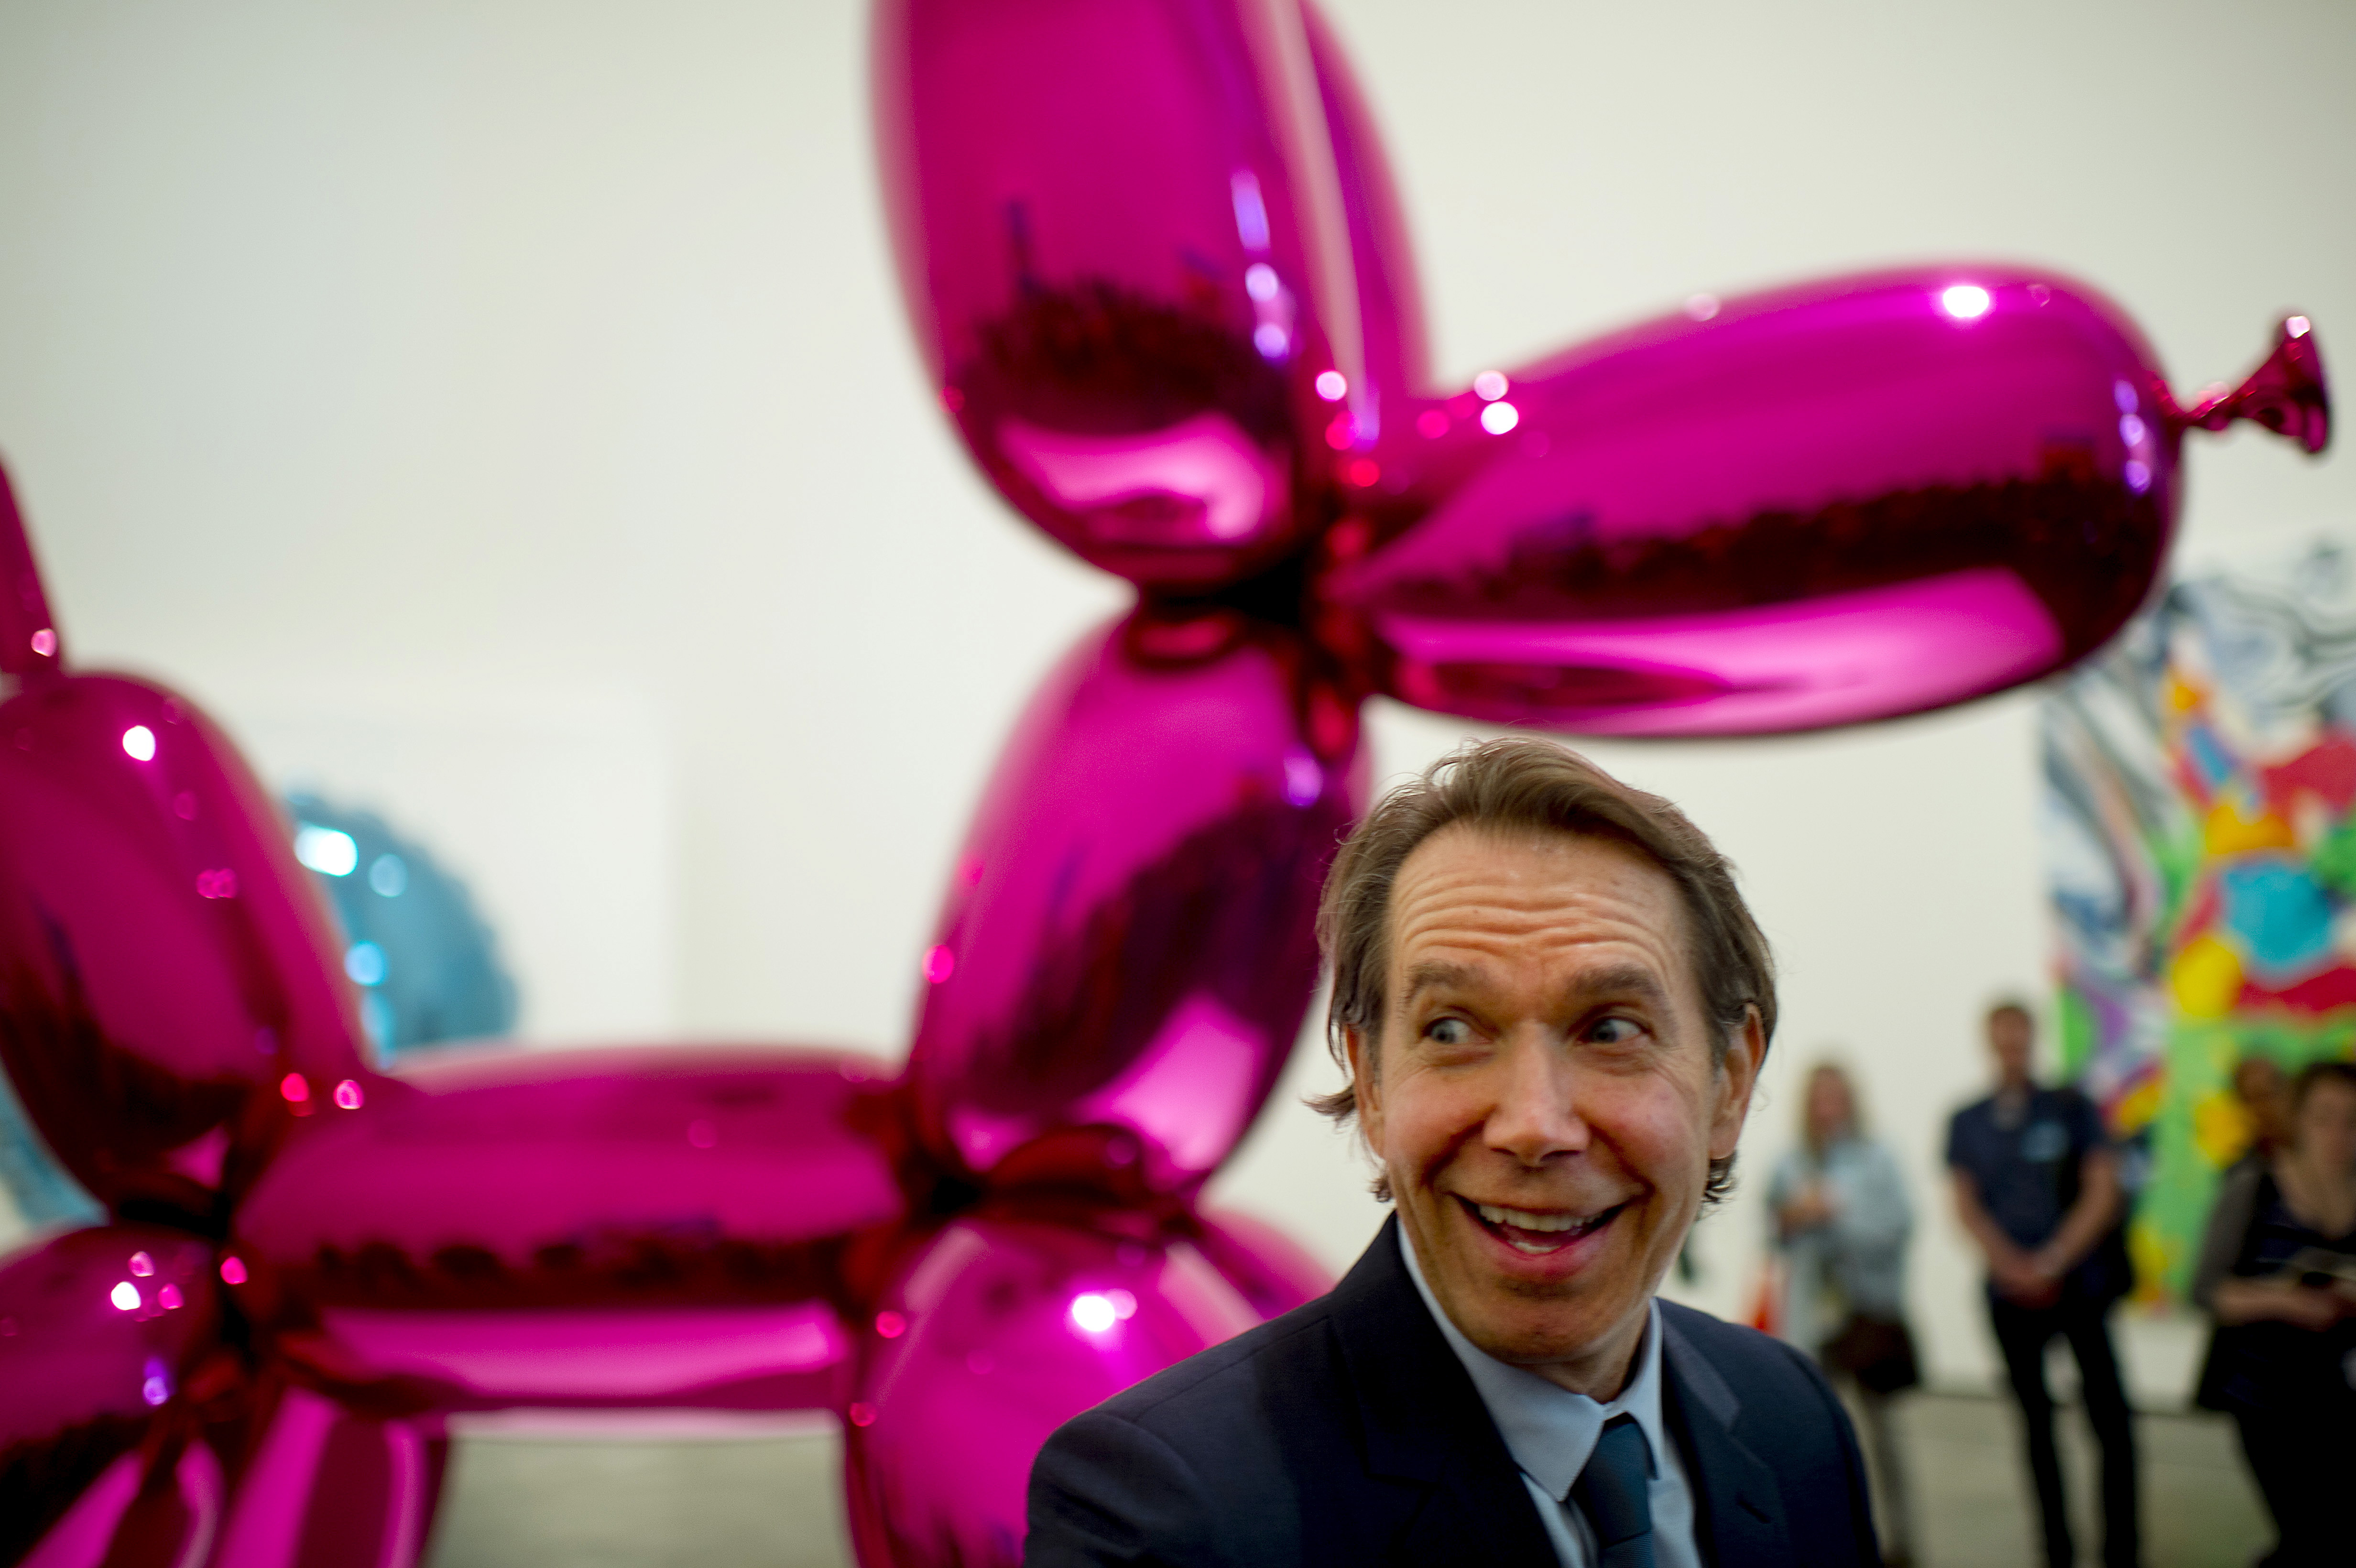 U.S. artist Jeff Koons stands in front of the stainless steel sculpture Balloon Dog during the presentation of 